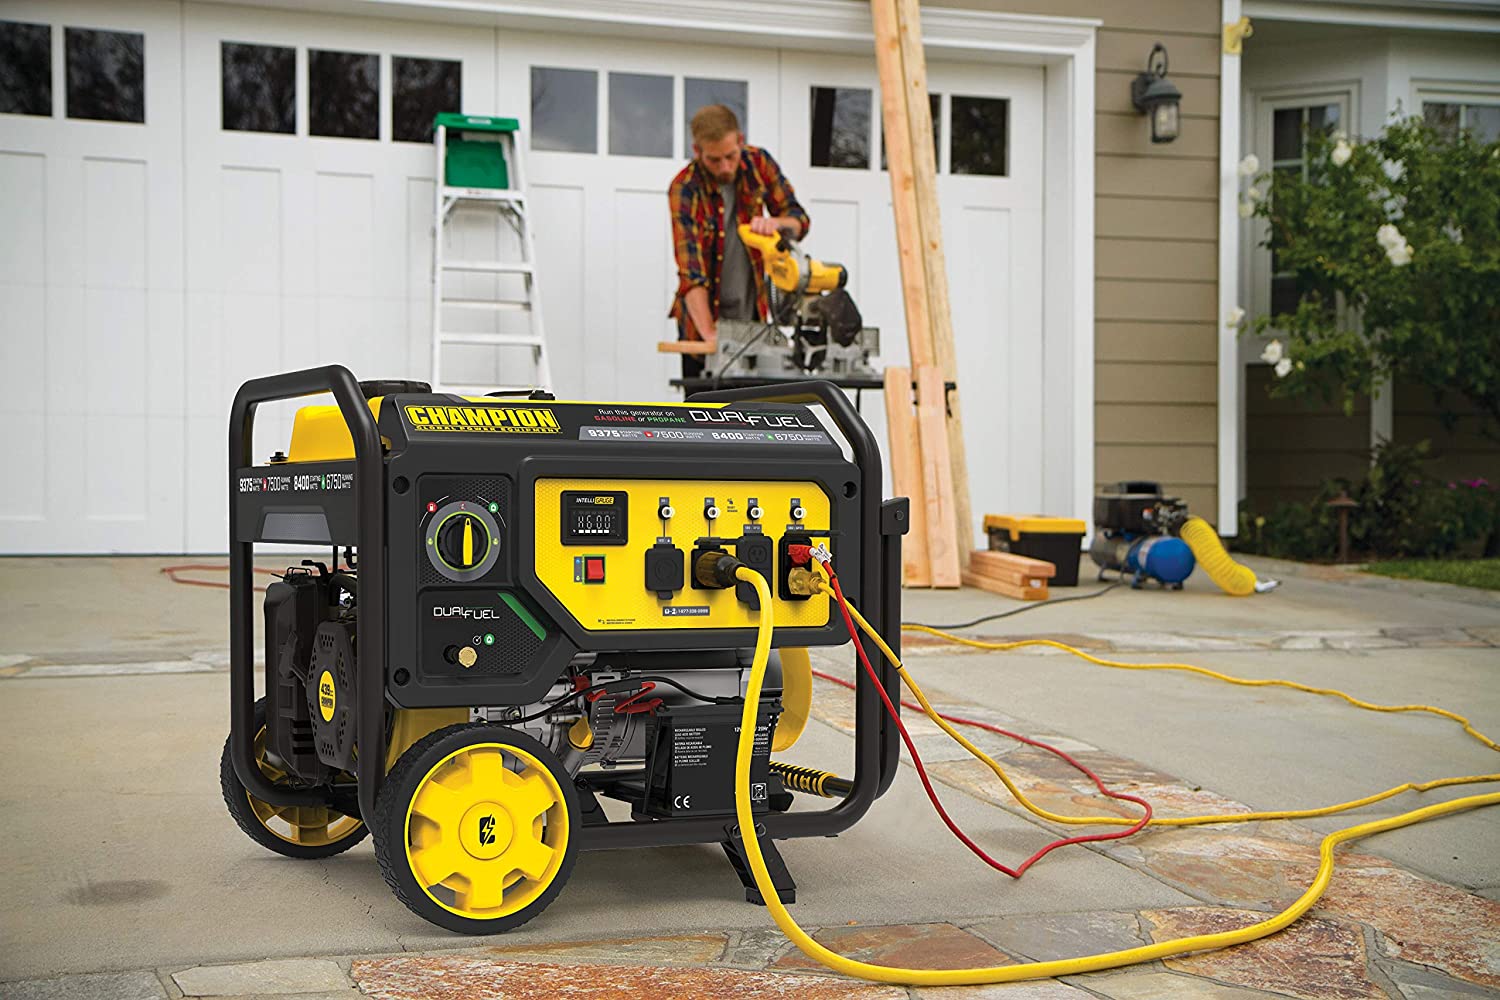 Amazon Most Expensive Products 2022 Home Generator.jpg